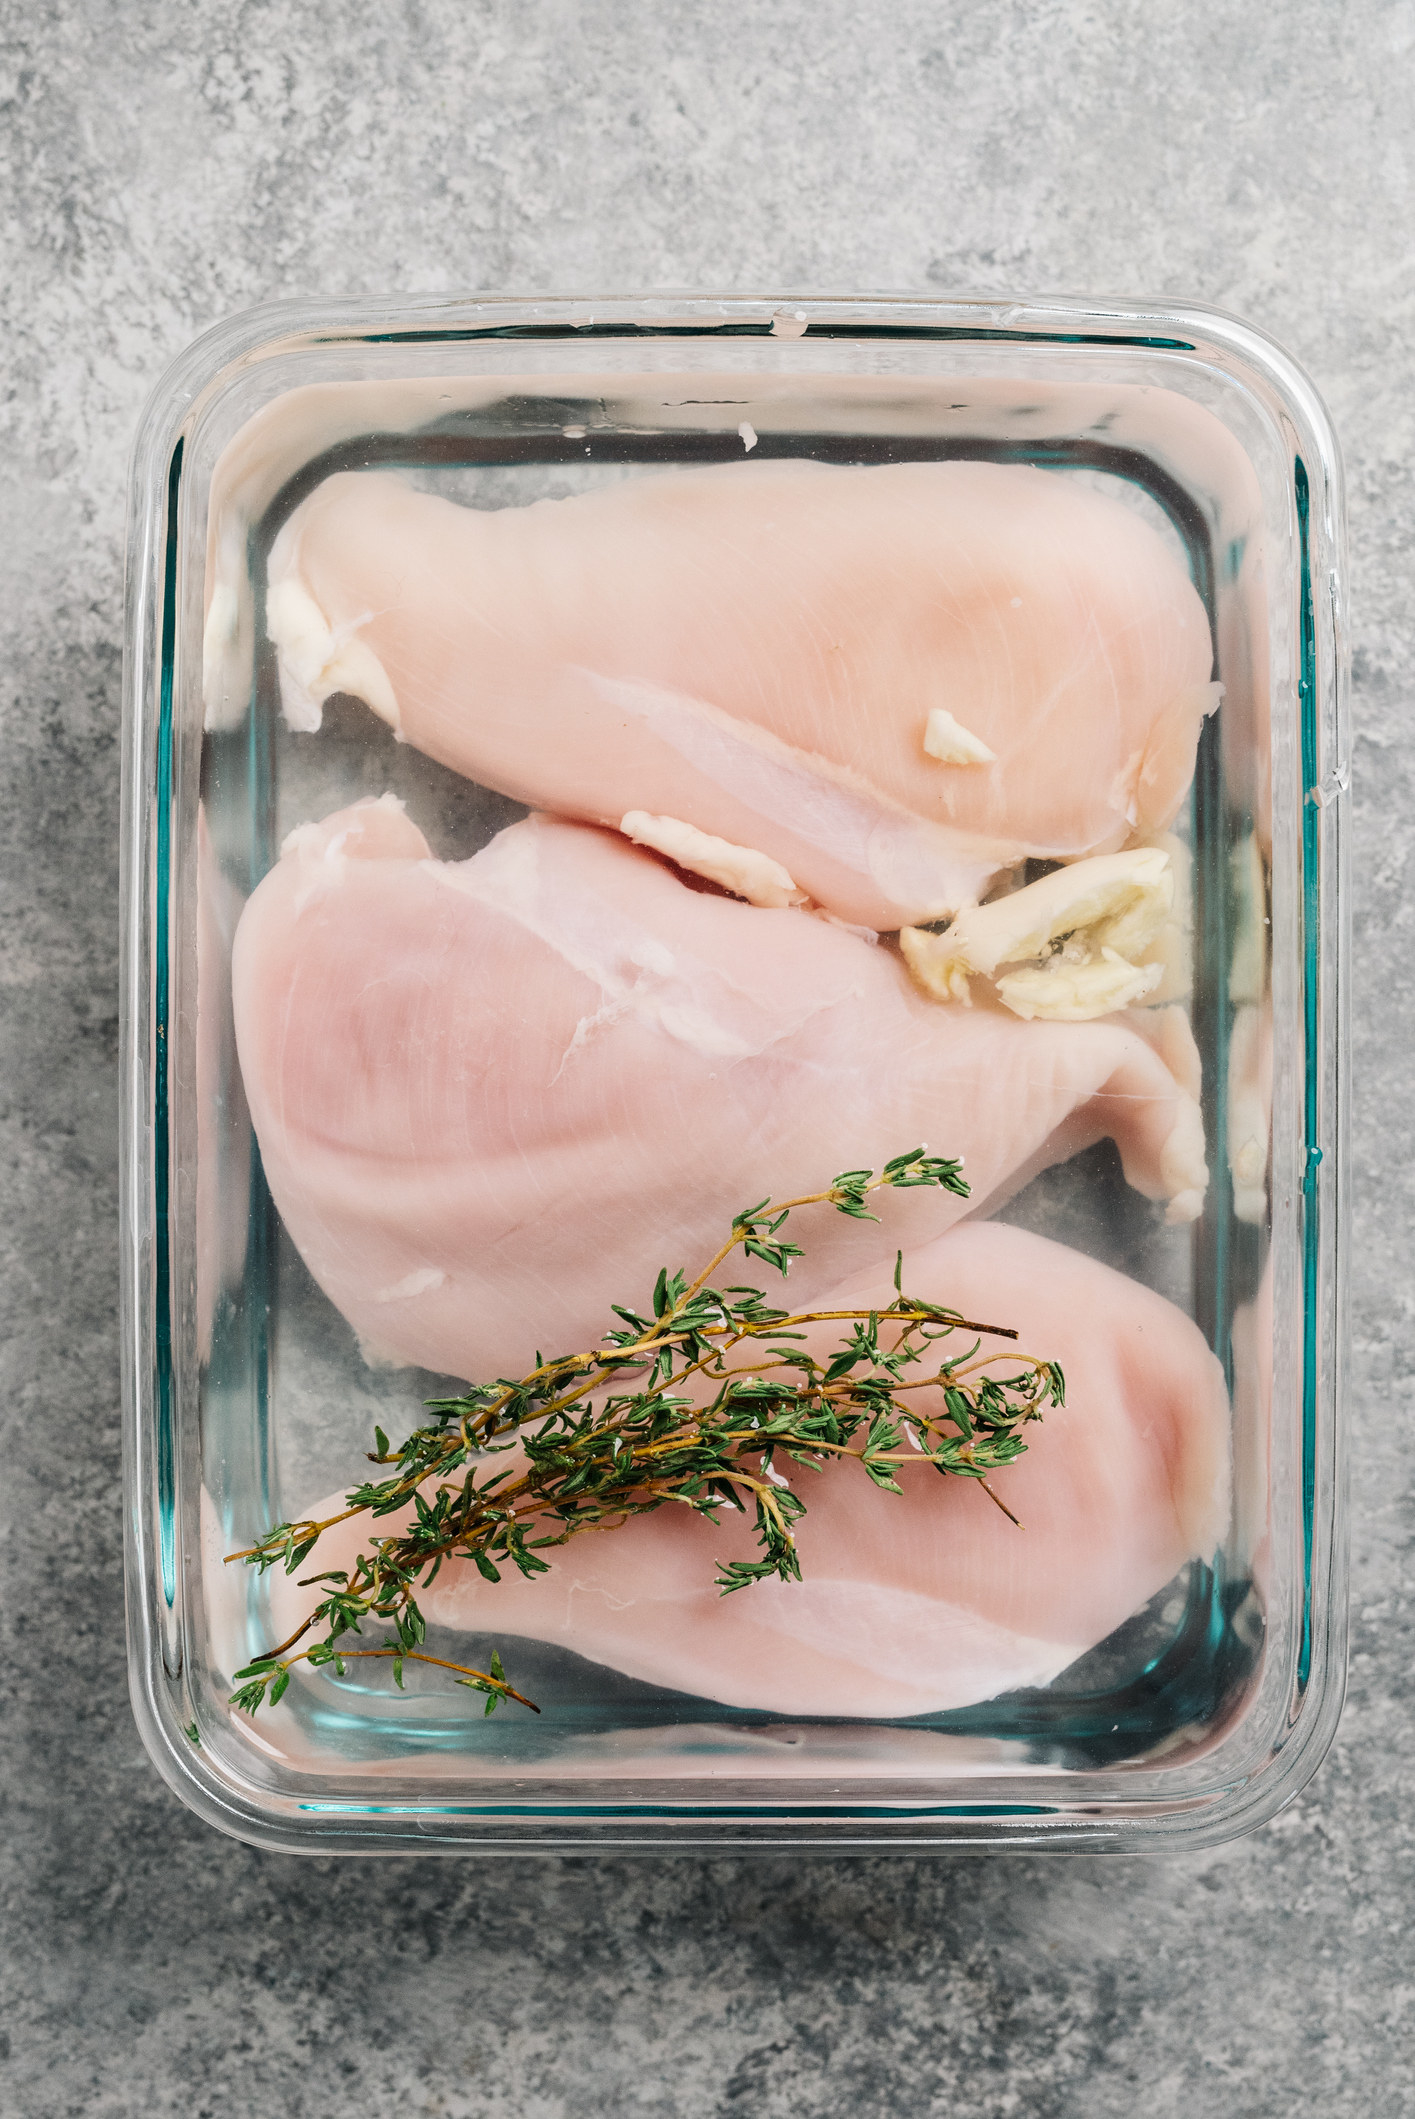 Chicken breasts brining with fresh thyme